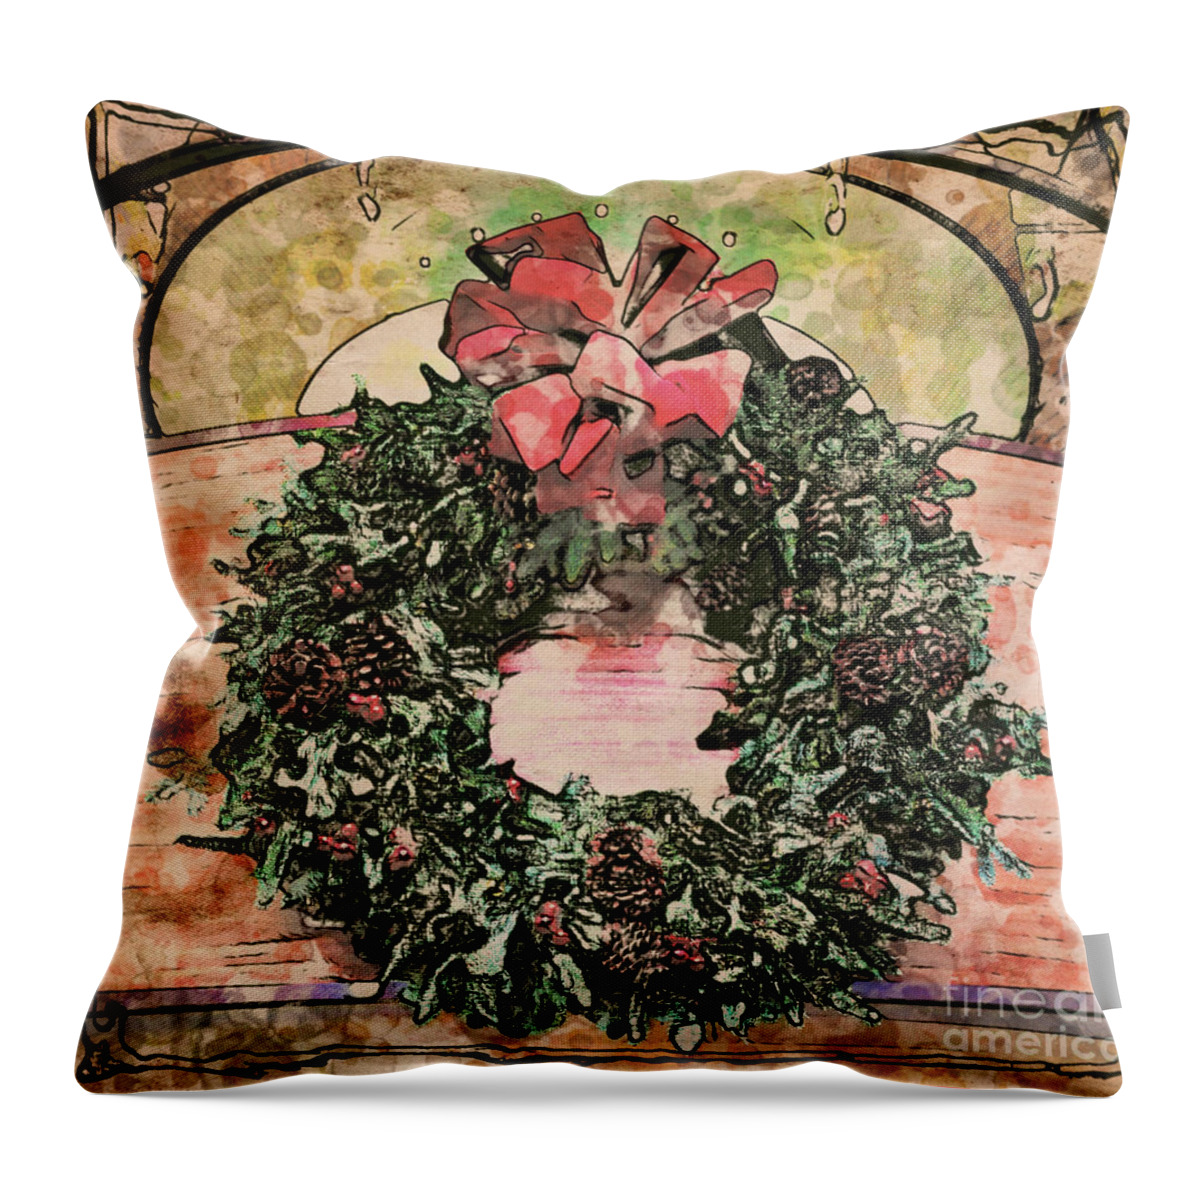 Wreath Throw Pillow featuring the photograph Joyful Wreath by Onedayoneimage Photography